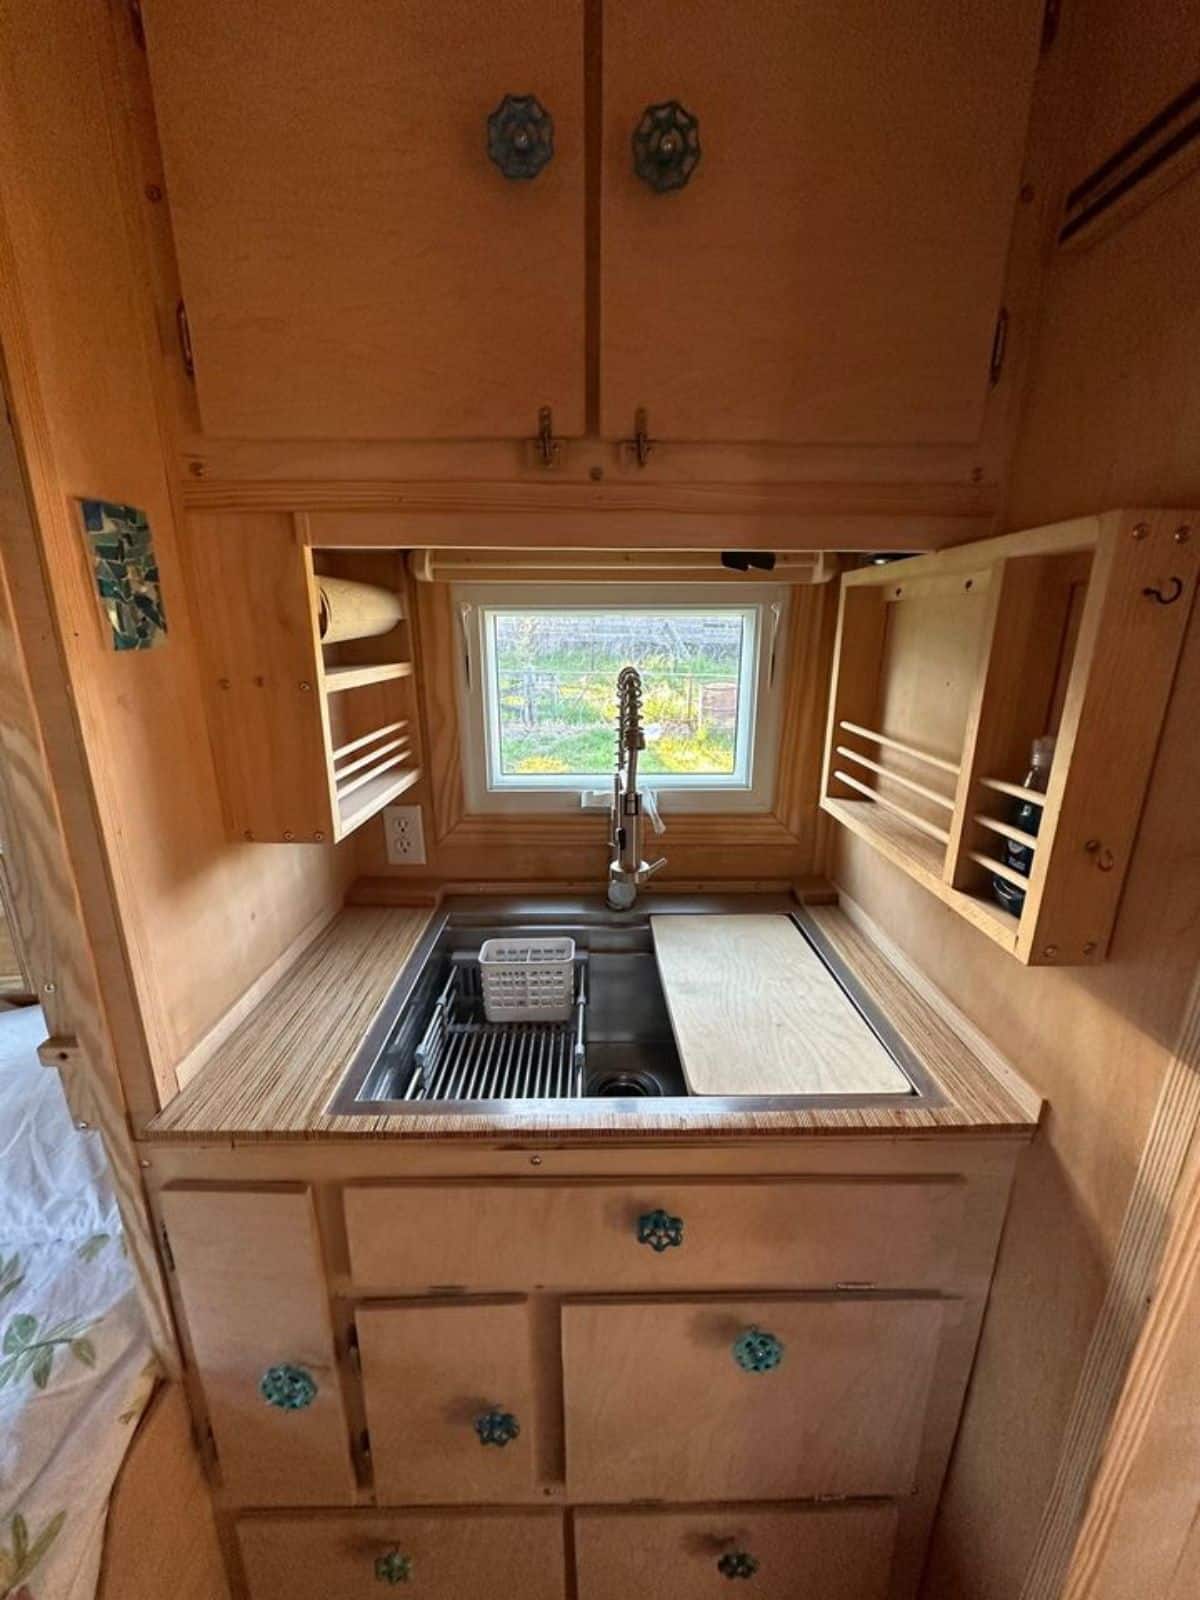 stainless steel sink with storage cabinets on opposite side of kitchen in rare custom built tiny home